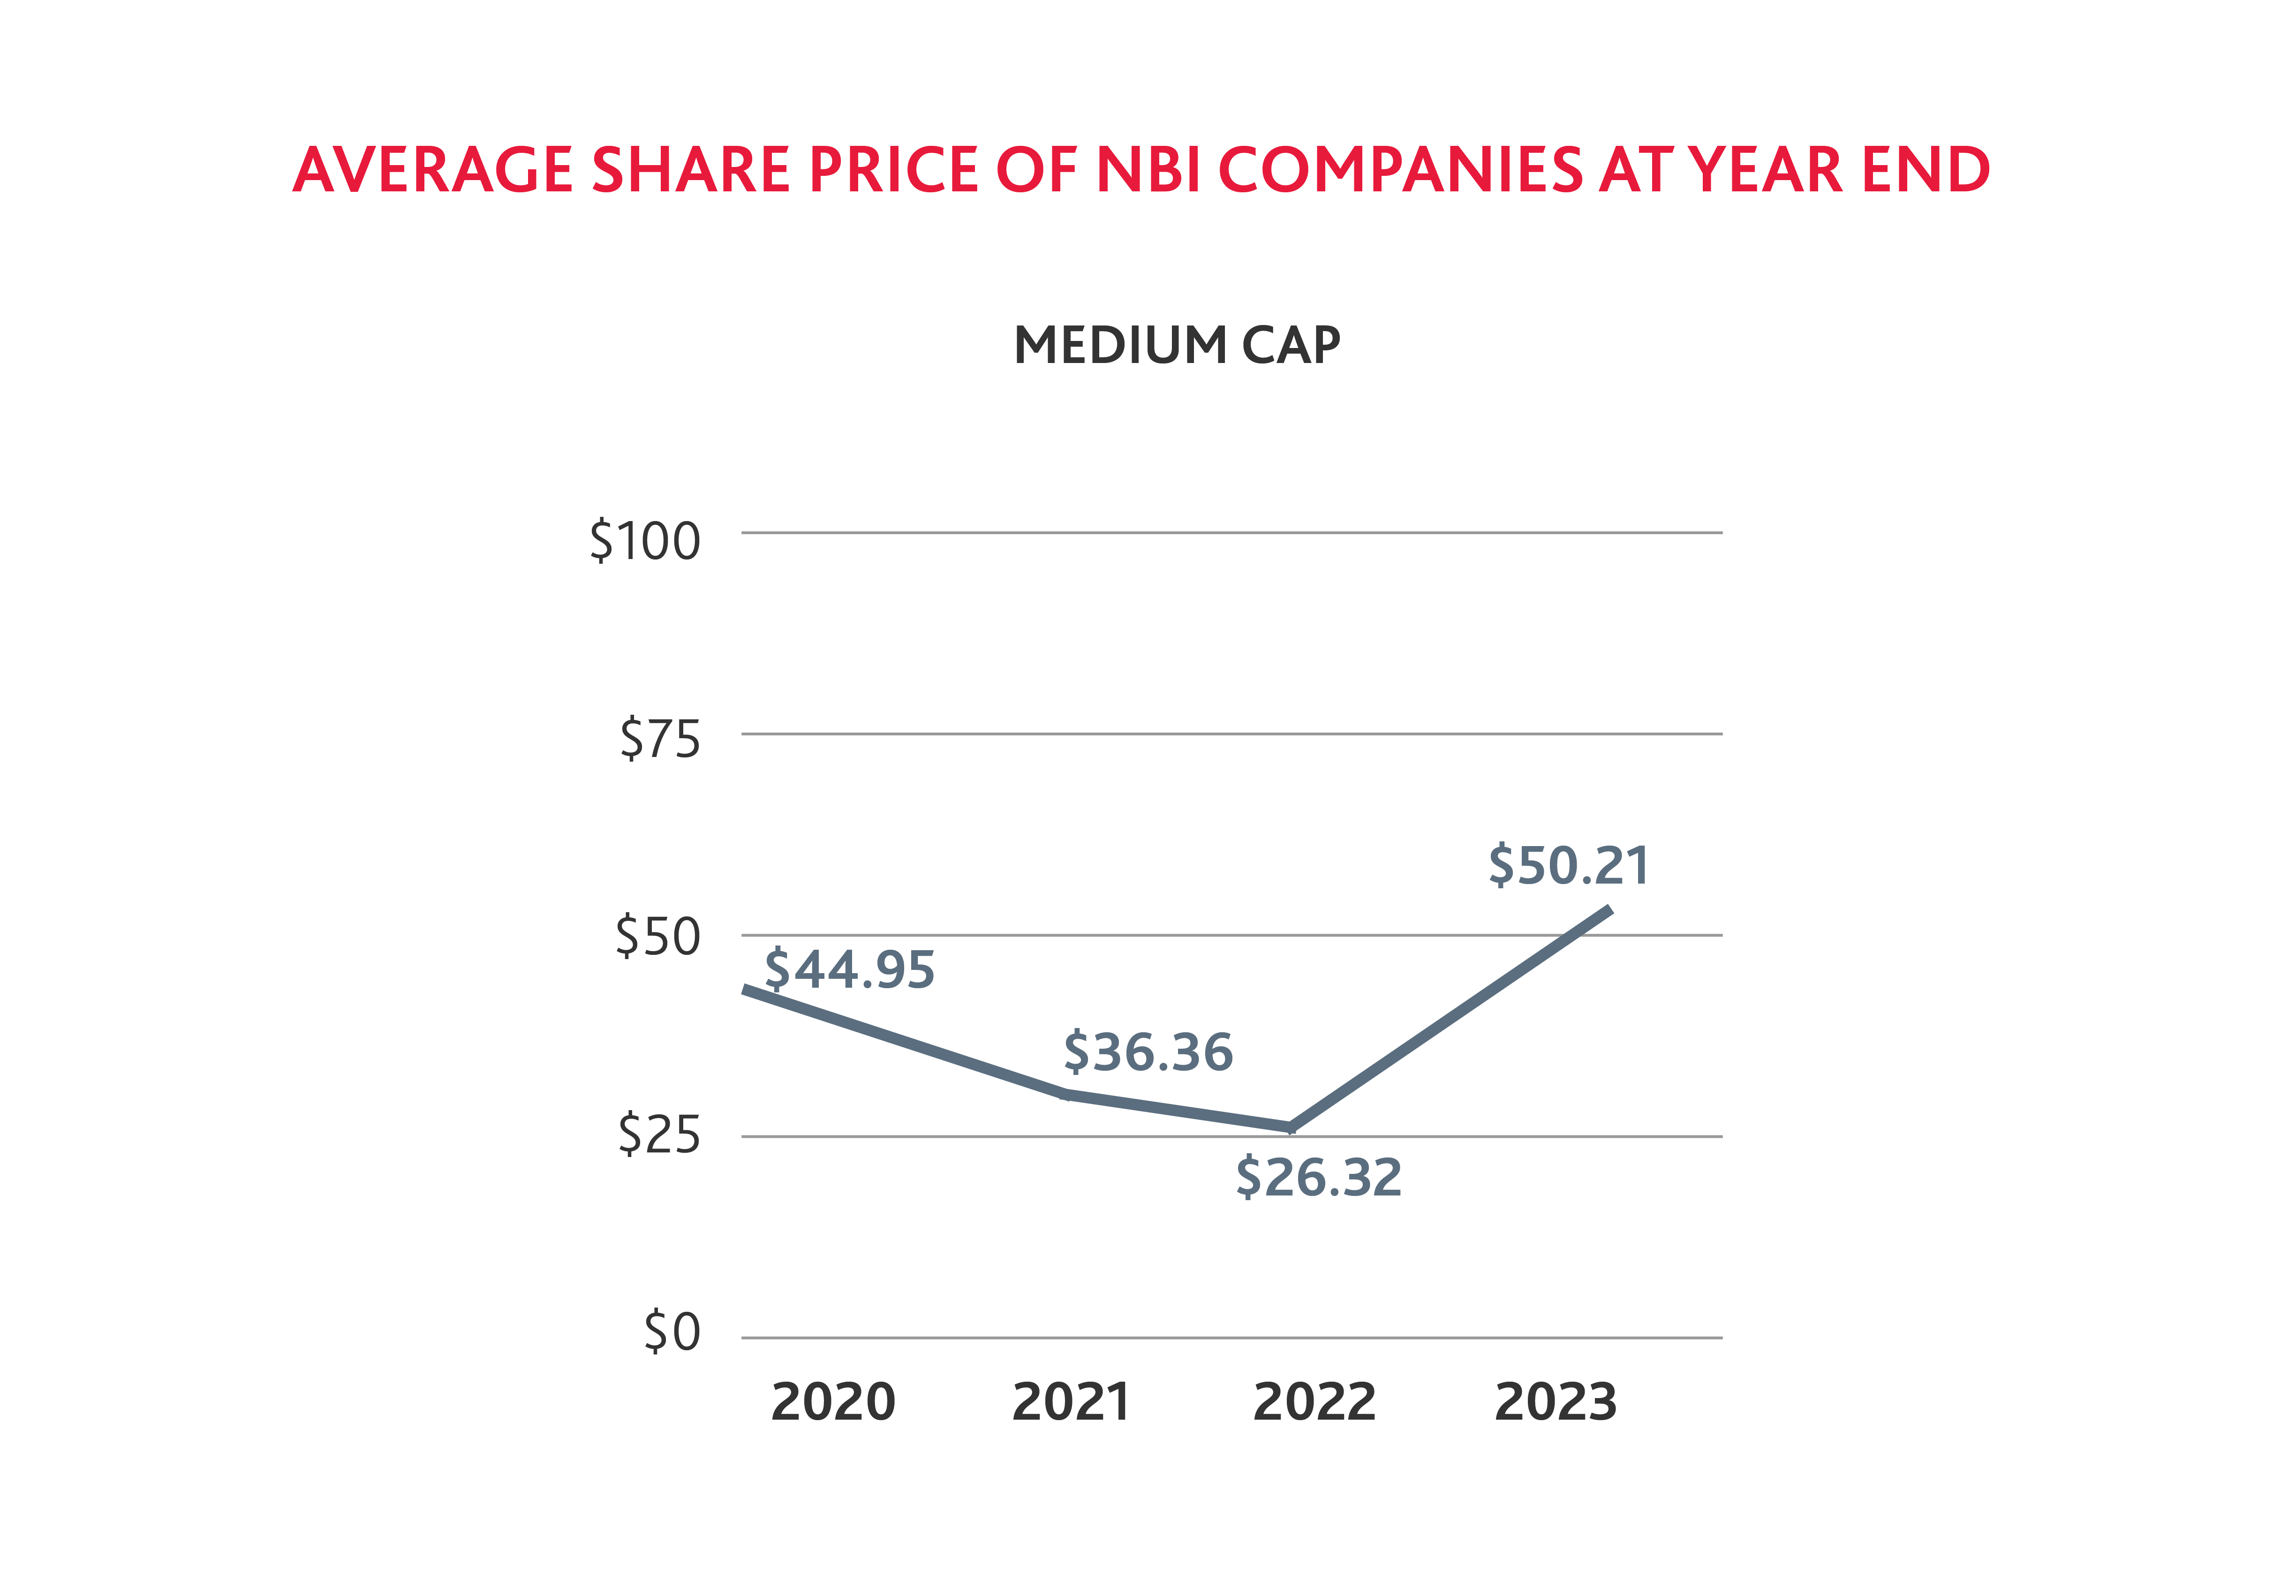 Chart showing average share price (medium CAP) of NBI companies at year end from 2020 to 2023